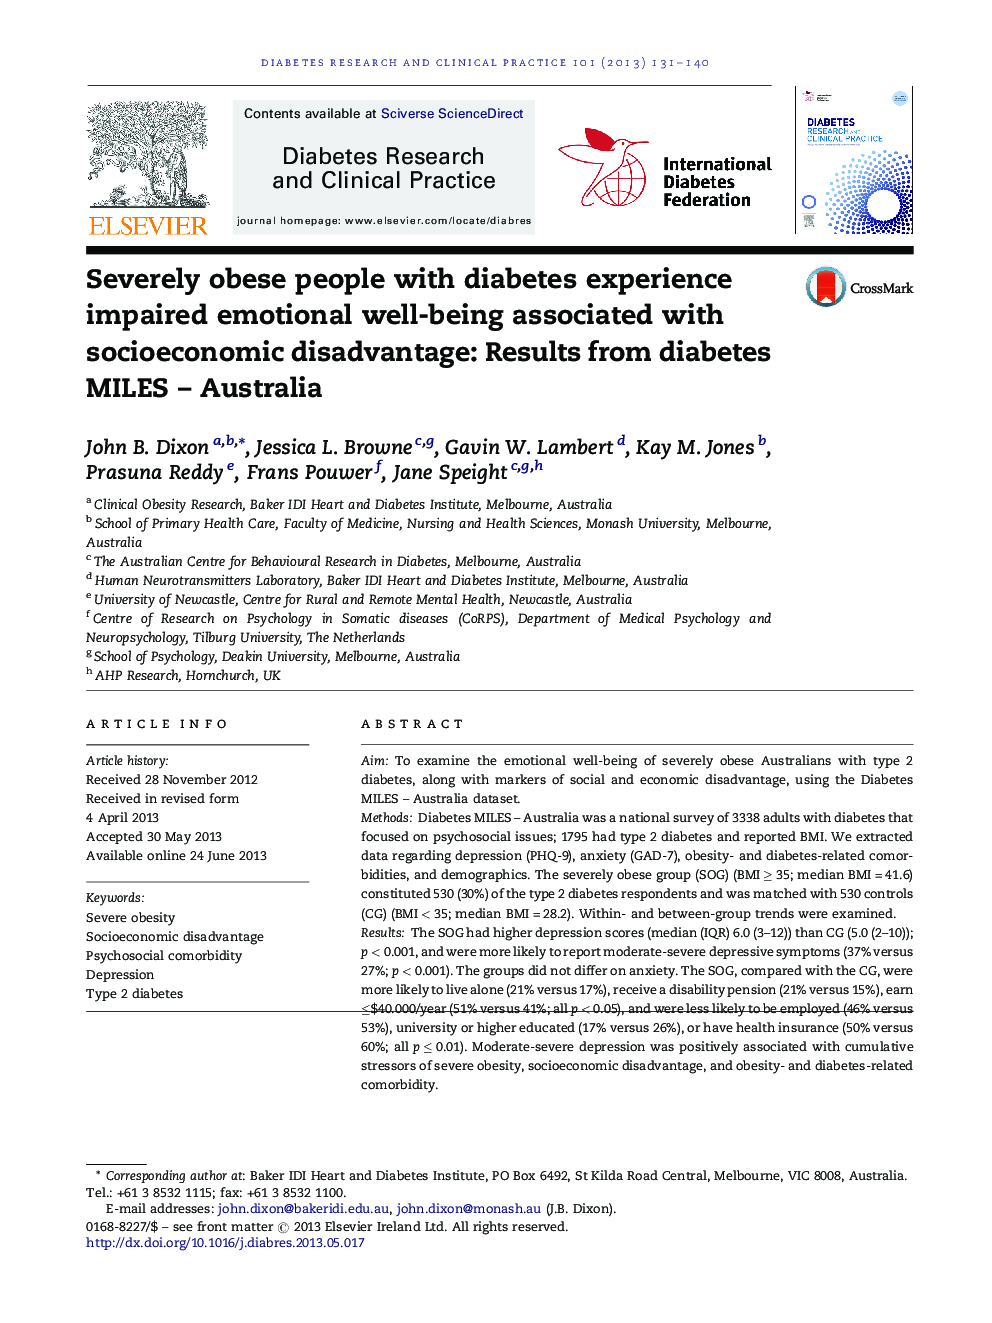 Severely obese people with diabetes experience impaired emotional well-being associated with socioeconomic disadvantage: Results from diabetes MILES – Australia